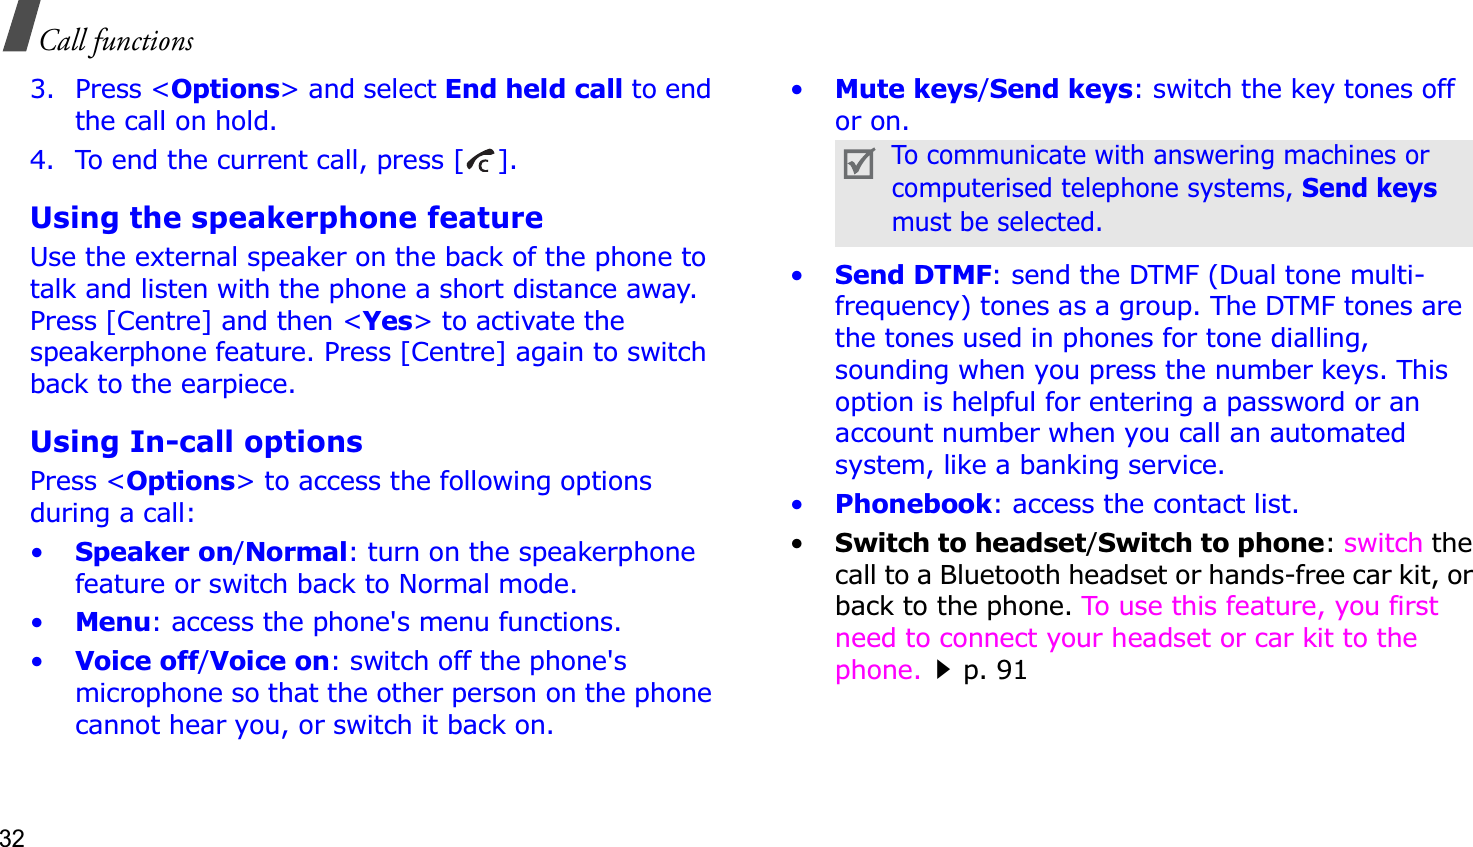 32Call functions3. Press &lt;Options&gt; and select End held call to end the call on hold.4. To end the current call, press [ ].Using the speakerphone featureUse the external speaker on the back of the phone to talk and listen with the phone a short distance away. Press [Centre] and then &lt;Yes&gt; to activate the speakerphone feature. Press [Centre] again to switch back to the earpiece.Using In-call optionsPress &lt;Options&gt; to access the following options during a call:•Speaker on/Normal: turn on the speakerphone feature or switch back to Normal mode.•Menu: access the phone&apos;s menu functions.•Voice off/Voice on: switch off the phone&apos;s microphone so that the other person on the phone cannot hear you, or switch it back on.•Mute keys/Send keys: switch the key tones off or on.•Send DTMF: send the DTMF (Dual tone multi-frequency) tones as a group. The DTMF tones are the tones used in phones for tone dialling, sounding when you press the number keys. This option is helpful for entering a password or an account number when you call an automated system, like a banking service.•Phonebook: access the contact list.•Switch to headset/Switch to phone:switch the call to a Bluetooth headset or hands-free car kit, or back to the phone. To use this feature, you first need to connect your headset or car kit to the phone.p. 91To communicate with answering machines or computerised telephone systems, Send keysmust be selected.